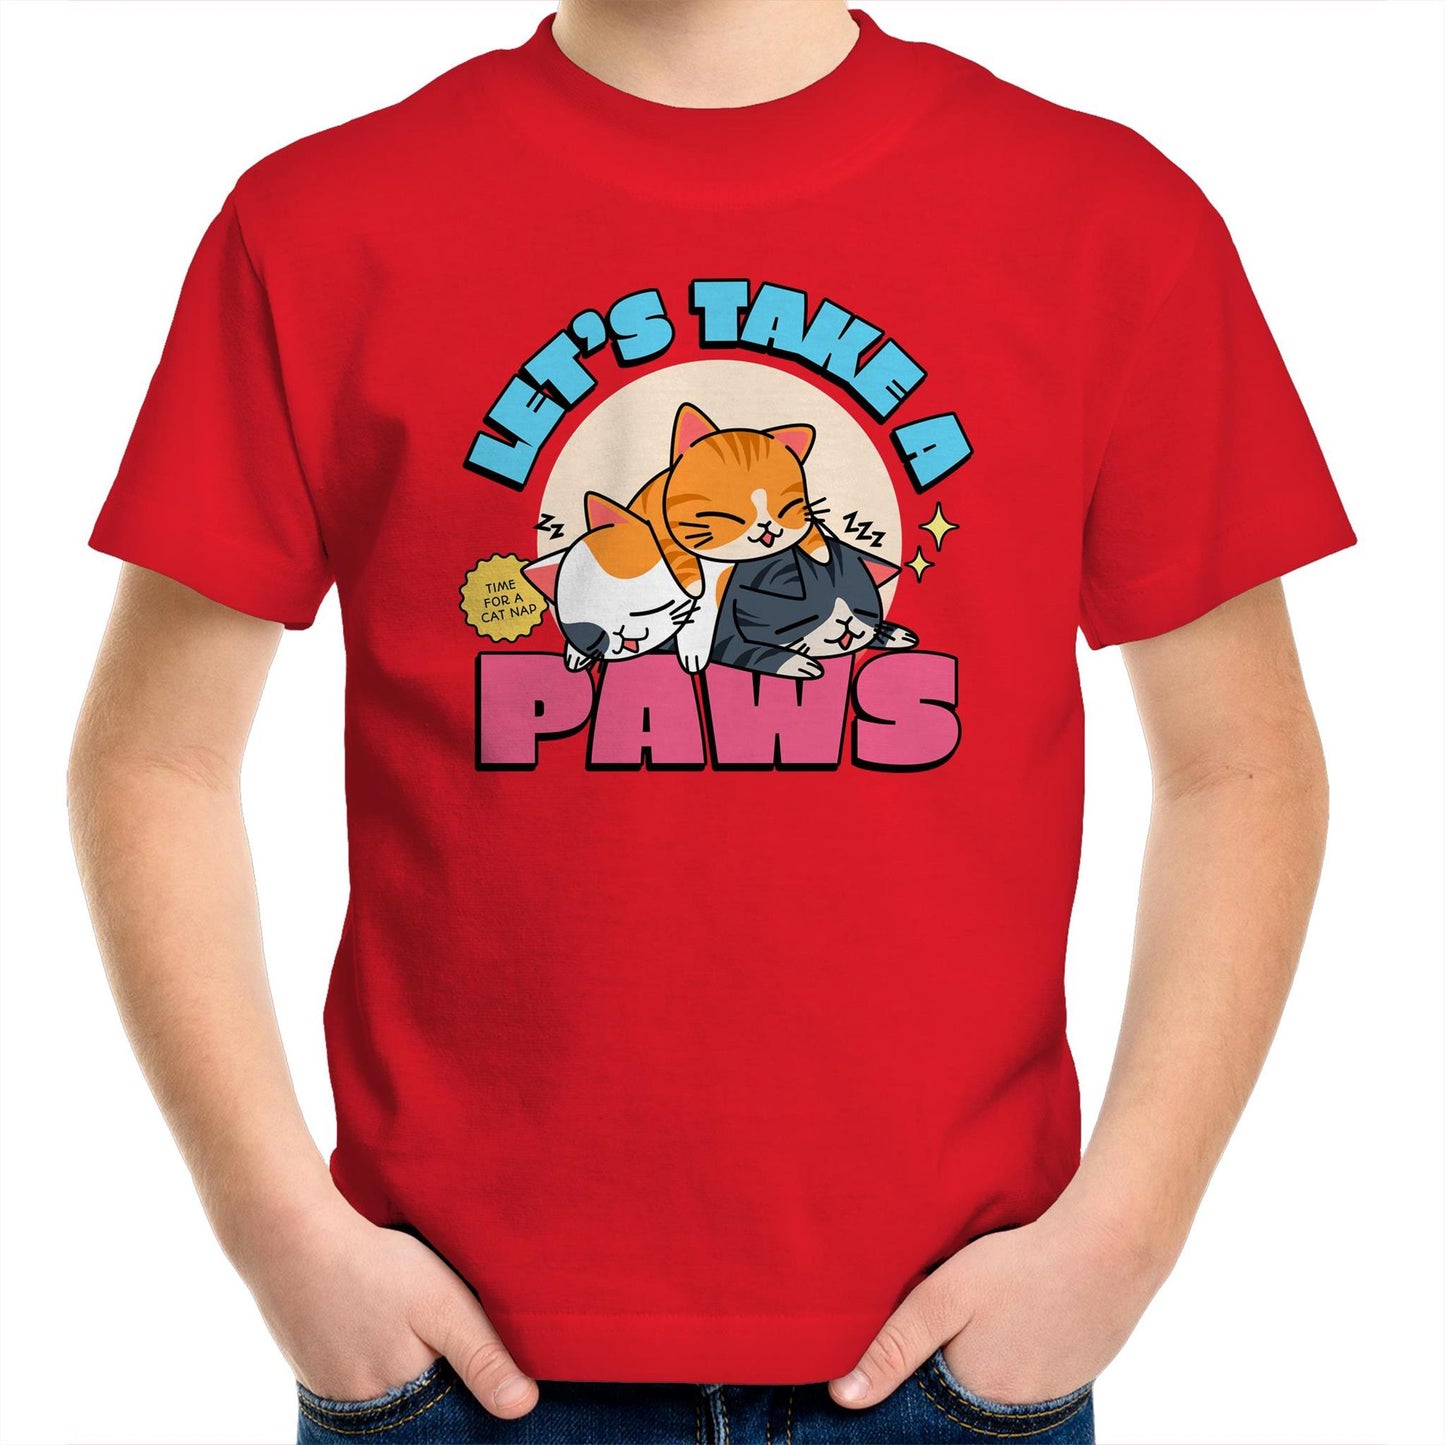 Let's Take A Pause, Time For A Cat Nap - Kids Youth T-Shirt Red Kids Youth T-shirt animal